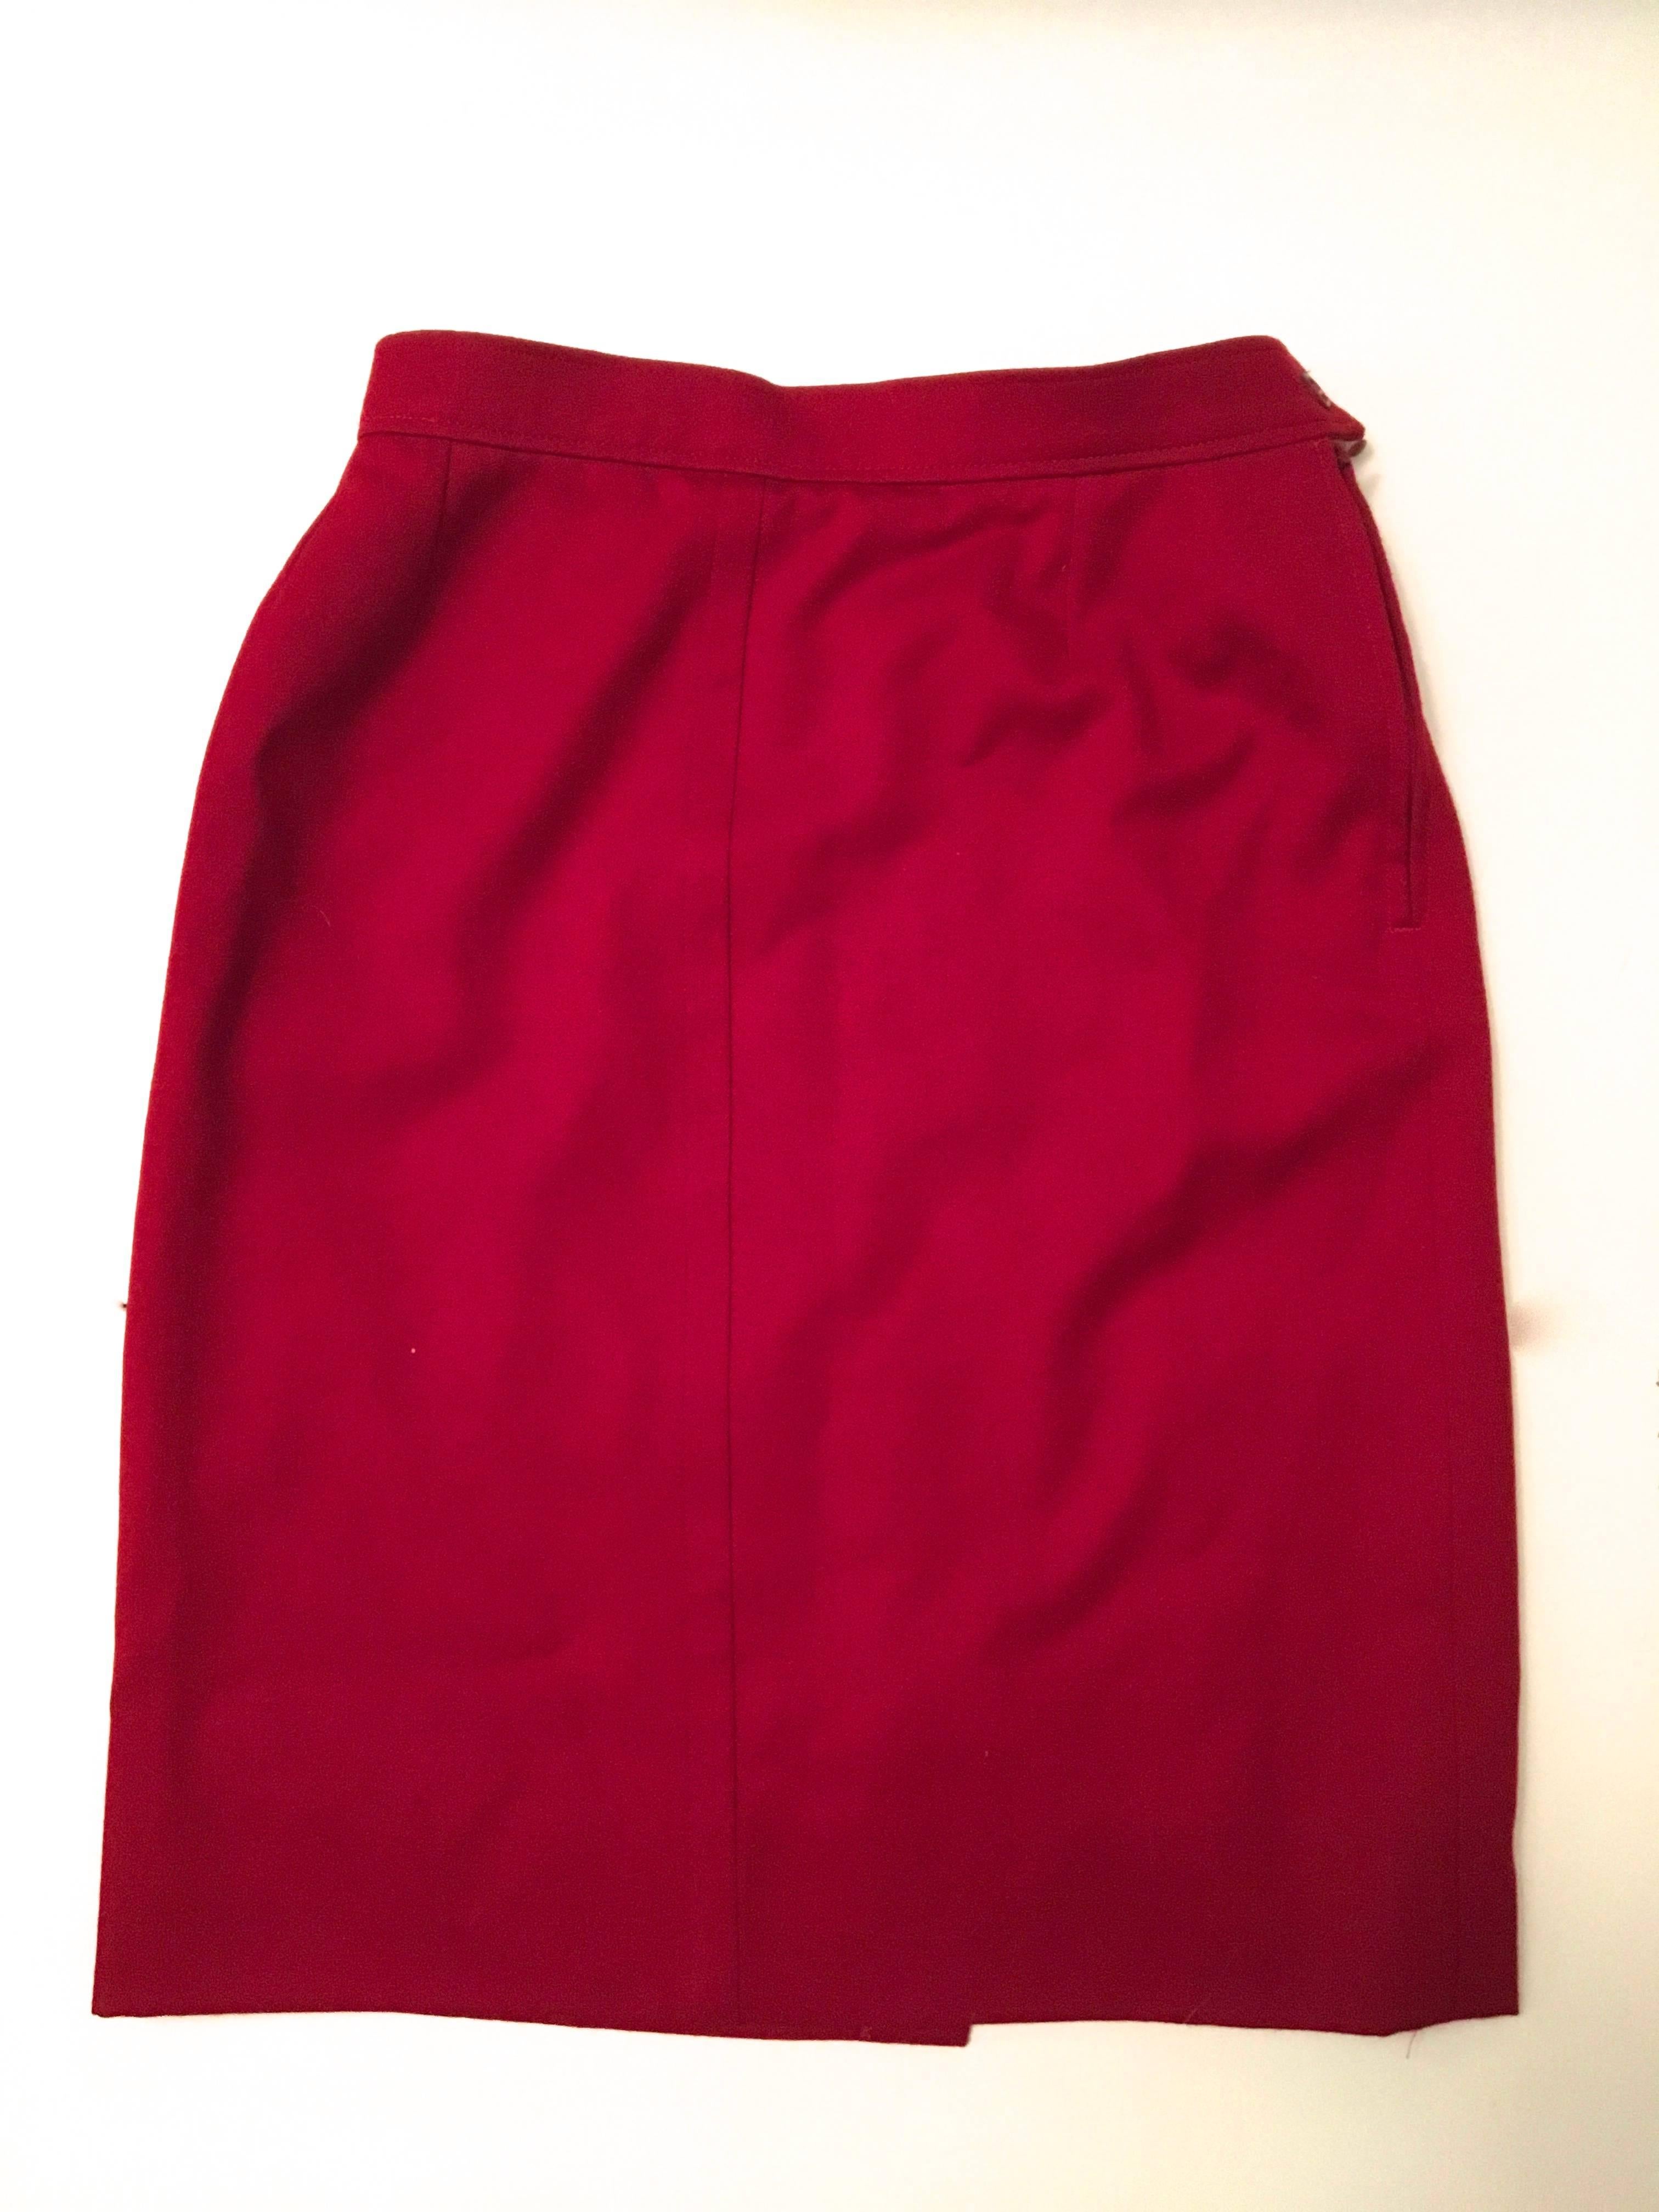 Presented here is an Yves Saint Laurent variation. It is a red wool skirt. It is a timeless skirt which is a must for any wardrobe. The skirt is 100% wool. Made in France. It is listed as a size 4. It is a straight red wool skirt with a 1.5 inch